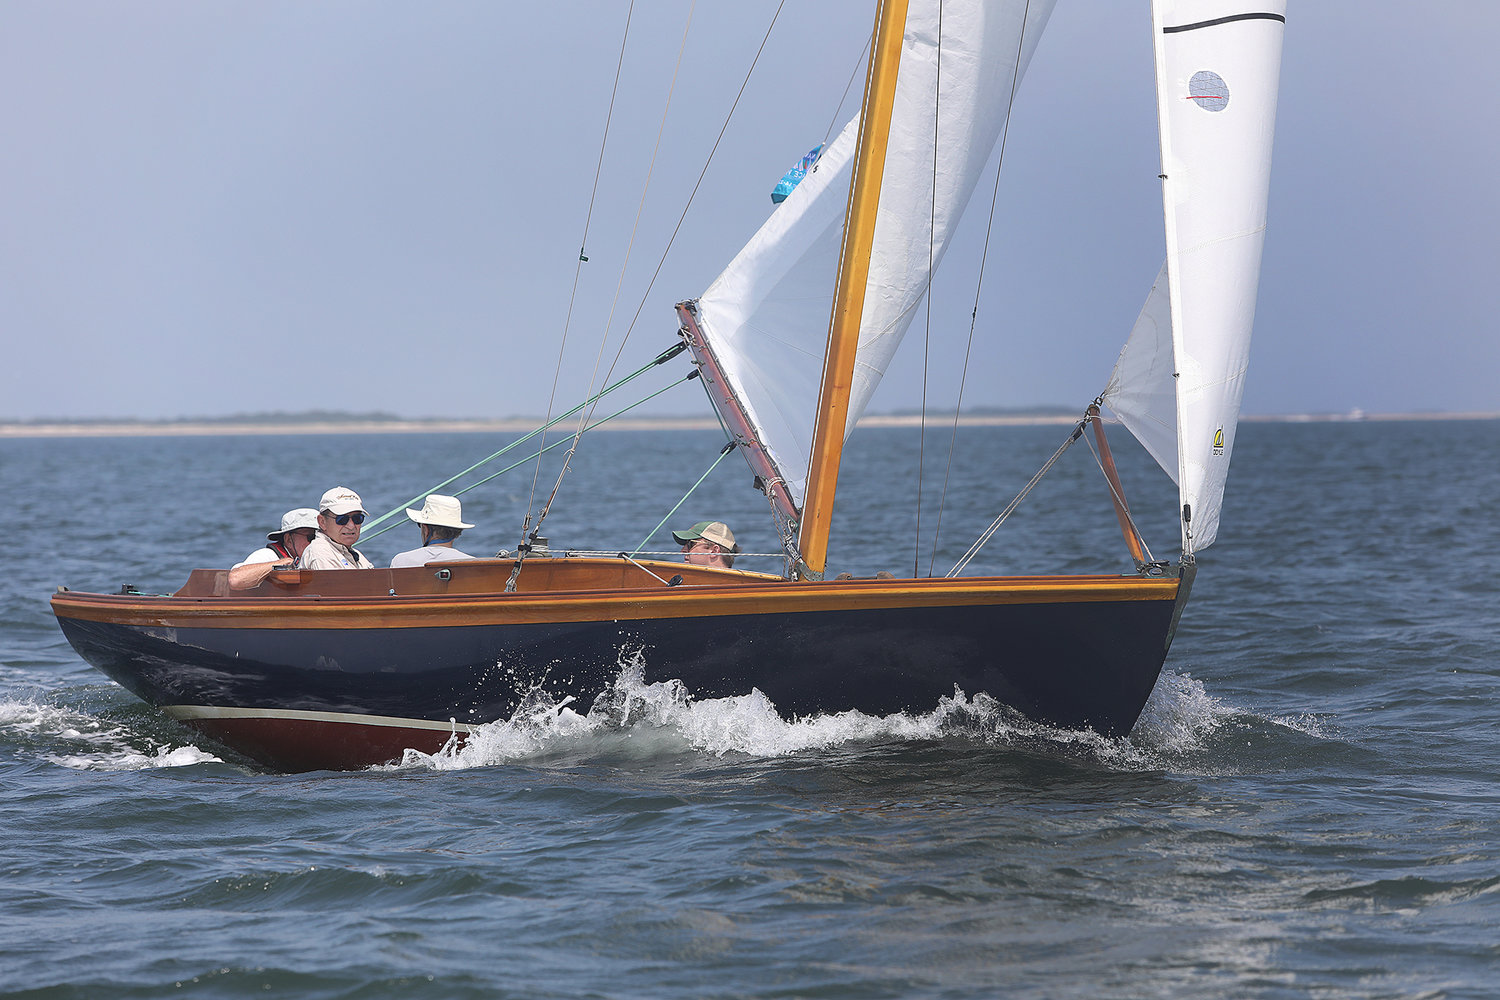 Serendipity, captained by Harry Rein, in last year’s One Design Regatta.